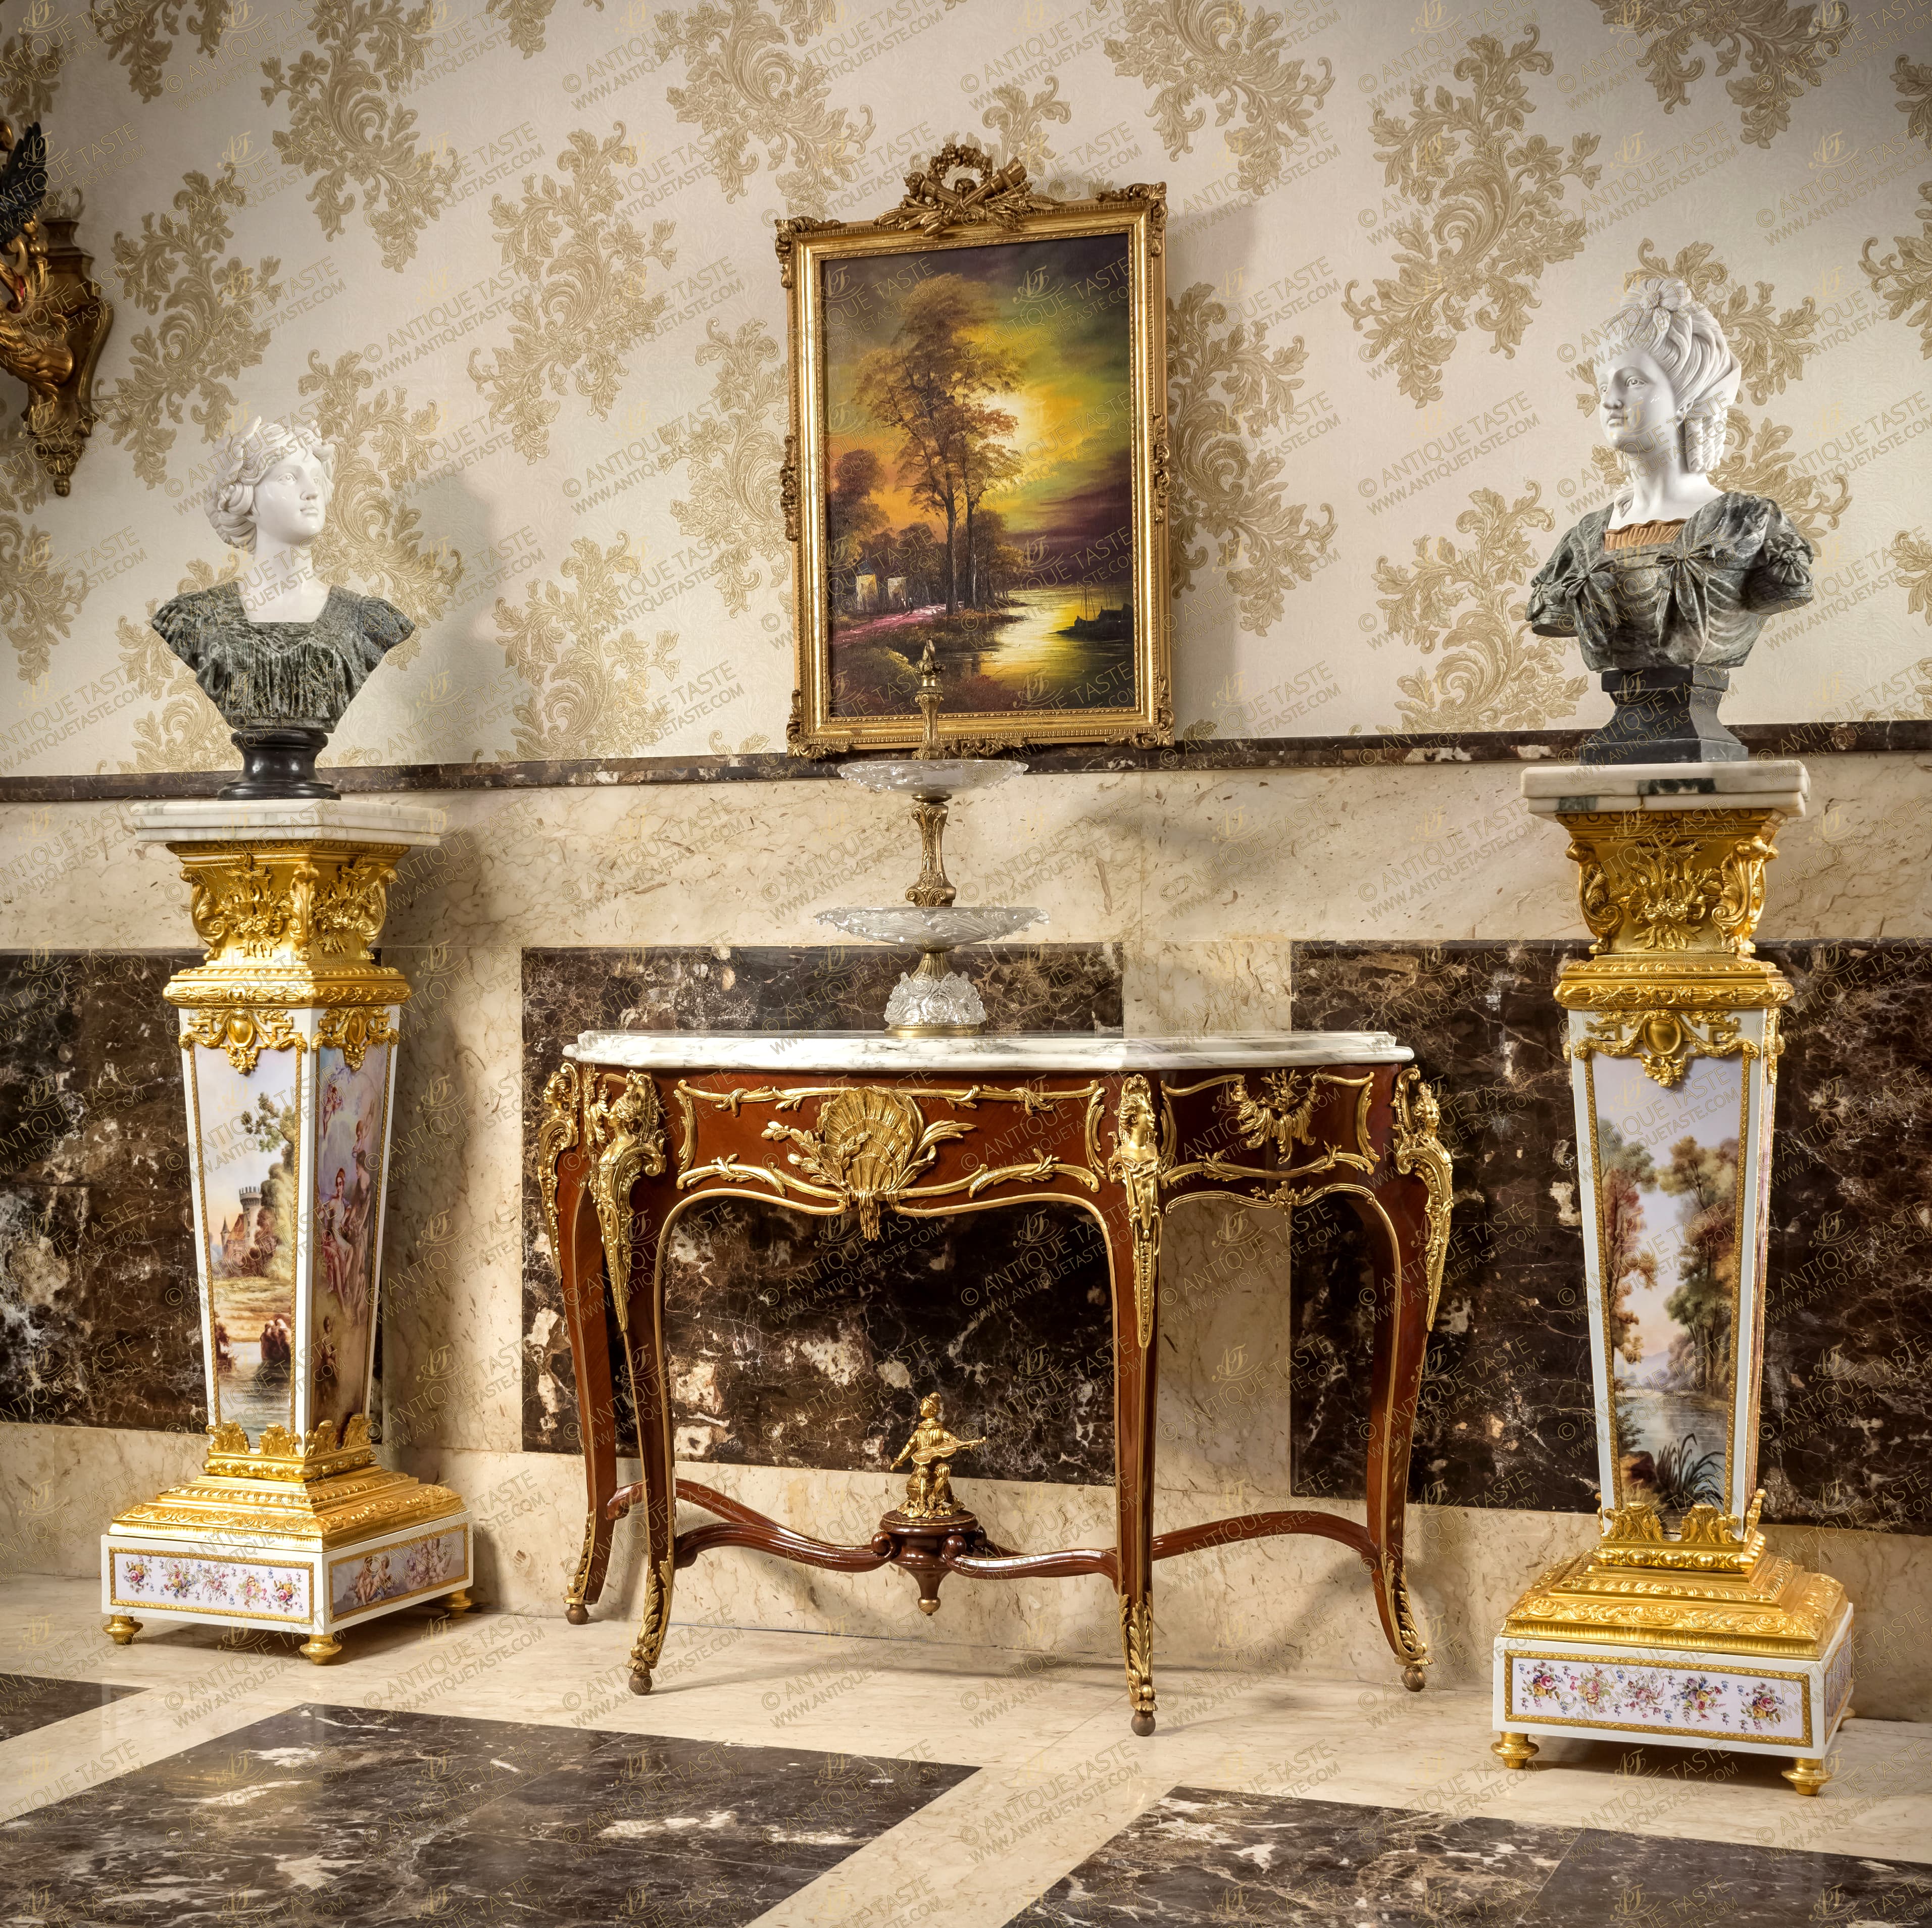 A royal and extremely stunning pair of French Louis XVI late Rococo and Vernis Martin style ormolu-mounted white lacquered hand carved and French foil gilded grand Bust Pedestals; The square mottled marble top rests above a fabulously hand carved concaved sides neck adorned with Egg and Cyma Recta bands, large scrolling acanthus leaves volutes and acanthus foliate bouquet above a laurel wreath astragal; The tapering body below is white lacquered and exquisitely hand painted in Vernis Martin style with landscape and Renaissance style mythological scenes depicting nymphs engaged with cupid and cherubs and enframed within a hammered ormolu band and surmounted with a finely chiseled ormolu mount of a cartouche issuing scrolling swaging bay leaf  garlands; Frets of Greek keys and blossoming acanthus leaves; the lower part is ornamented with an ormolu encadrement  of large scrolling Acanthus Mollis on an Egg trim; The lower plinth is white lacquered and surmounted with a leveled carved and French foil gilded frieze of different architectural decorative patterns and hand painted with playful cherubs and colorful flower bouquets enframed within a hammered ormolu band; all above the gilded topie shaped feet.